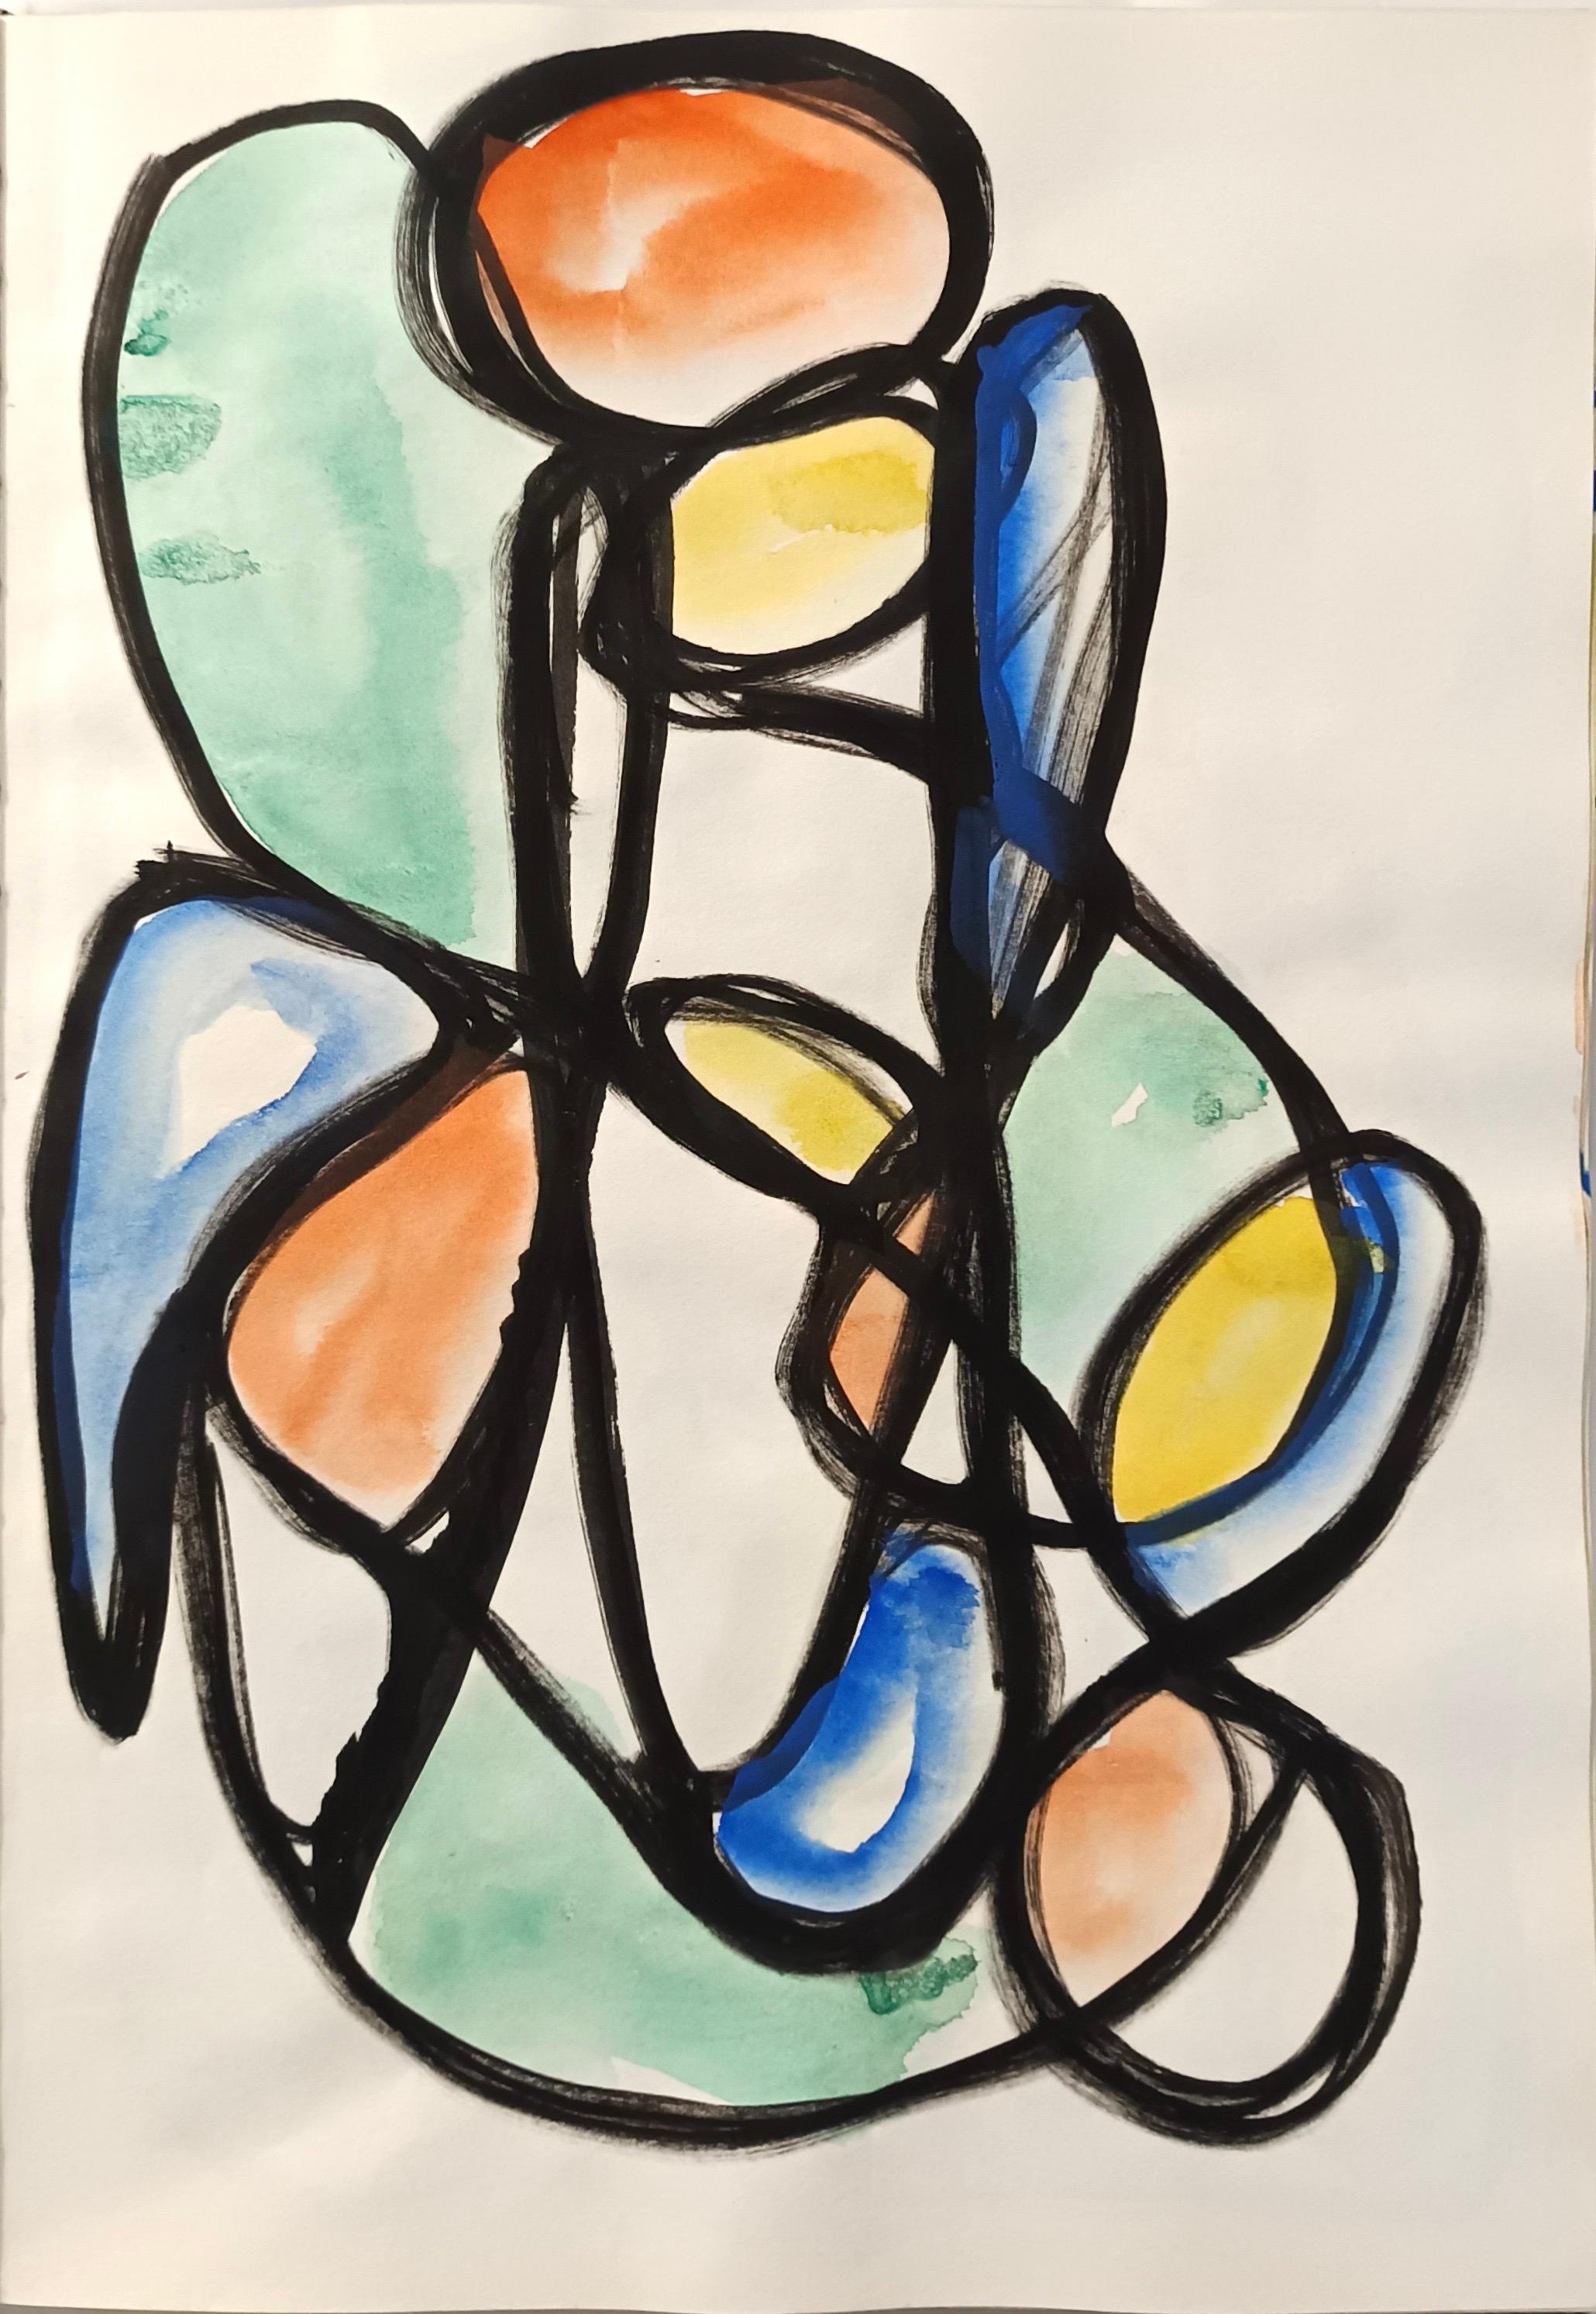 "Composizione" by E. Wenk, 2020-21 - Watercolor and Acrylic Paint, Abstract